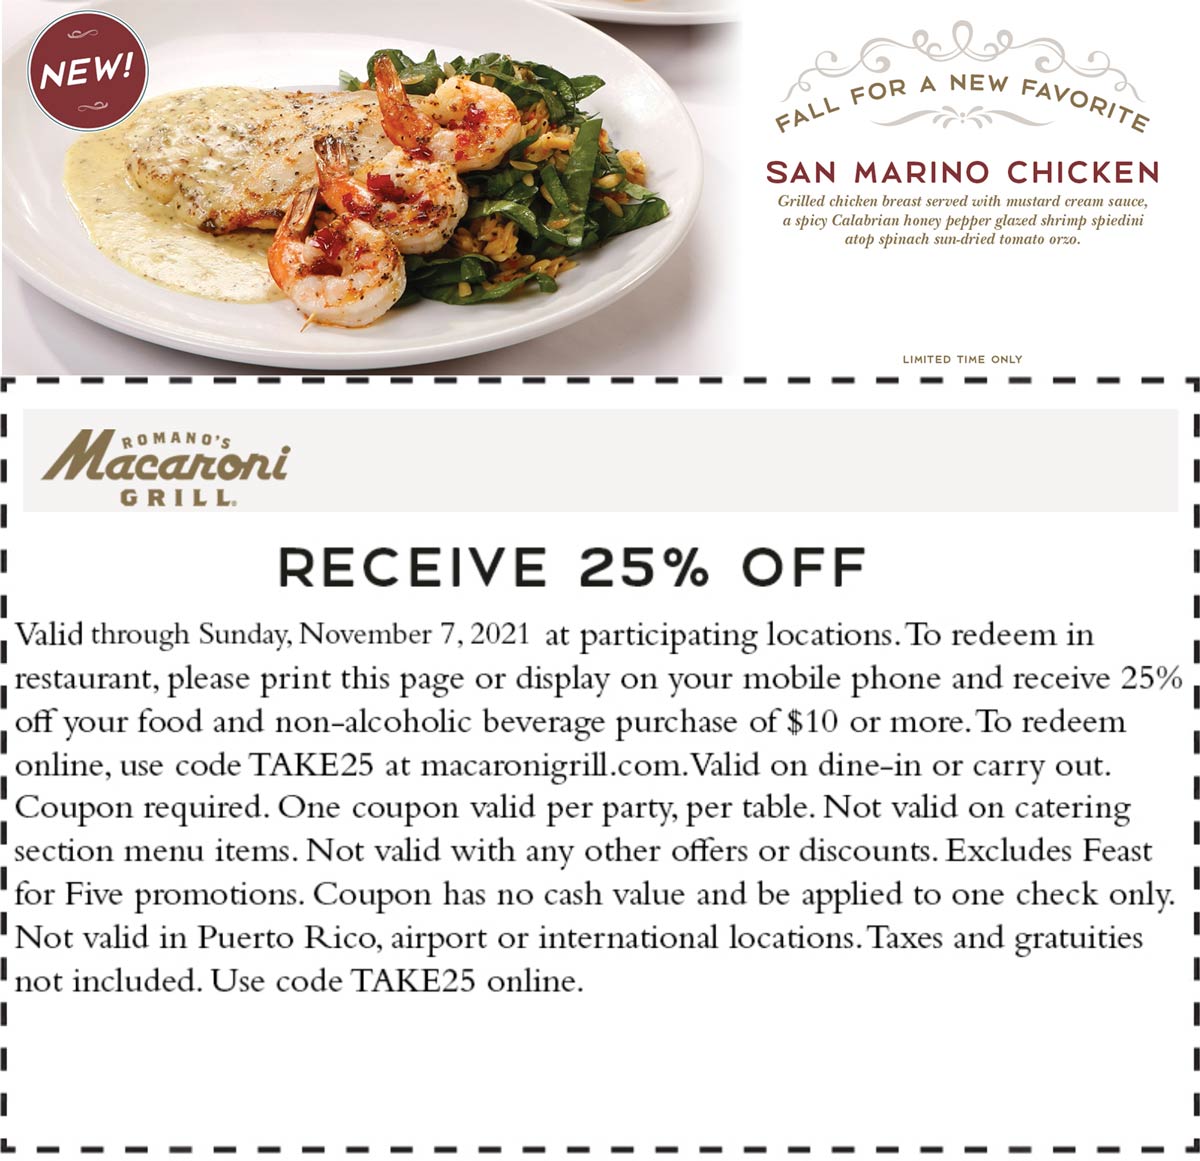 Macaroni Grill restaurants Coupon  25% off at Macaroni Grill restaurants via promo code TAKE25 #macaronigrill 